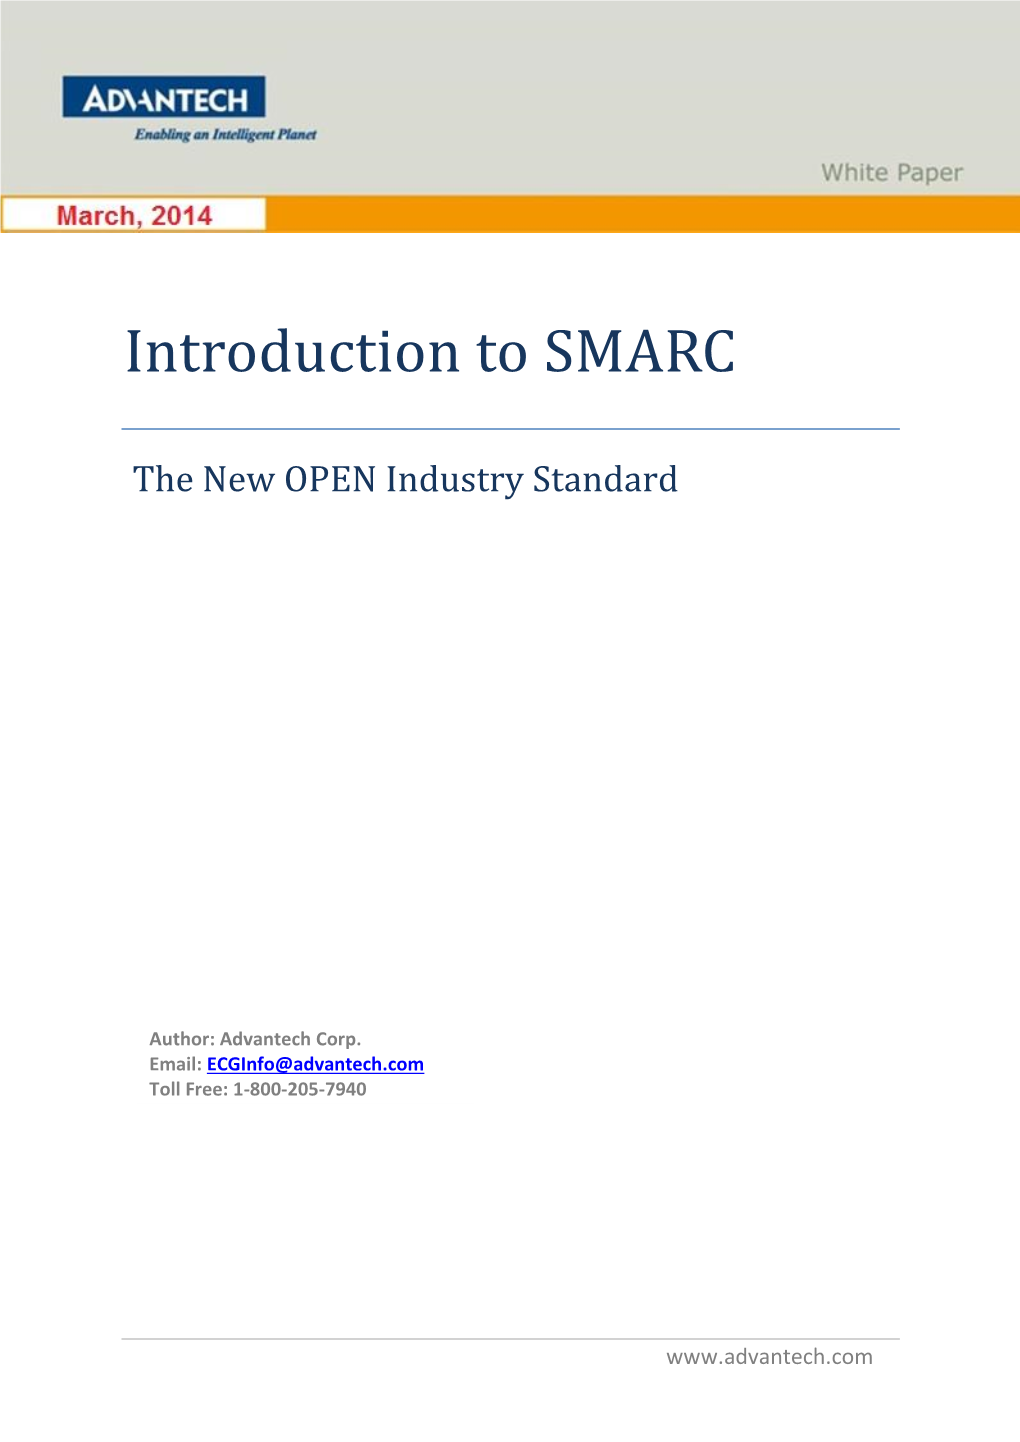 Introduction to SMARC